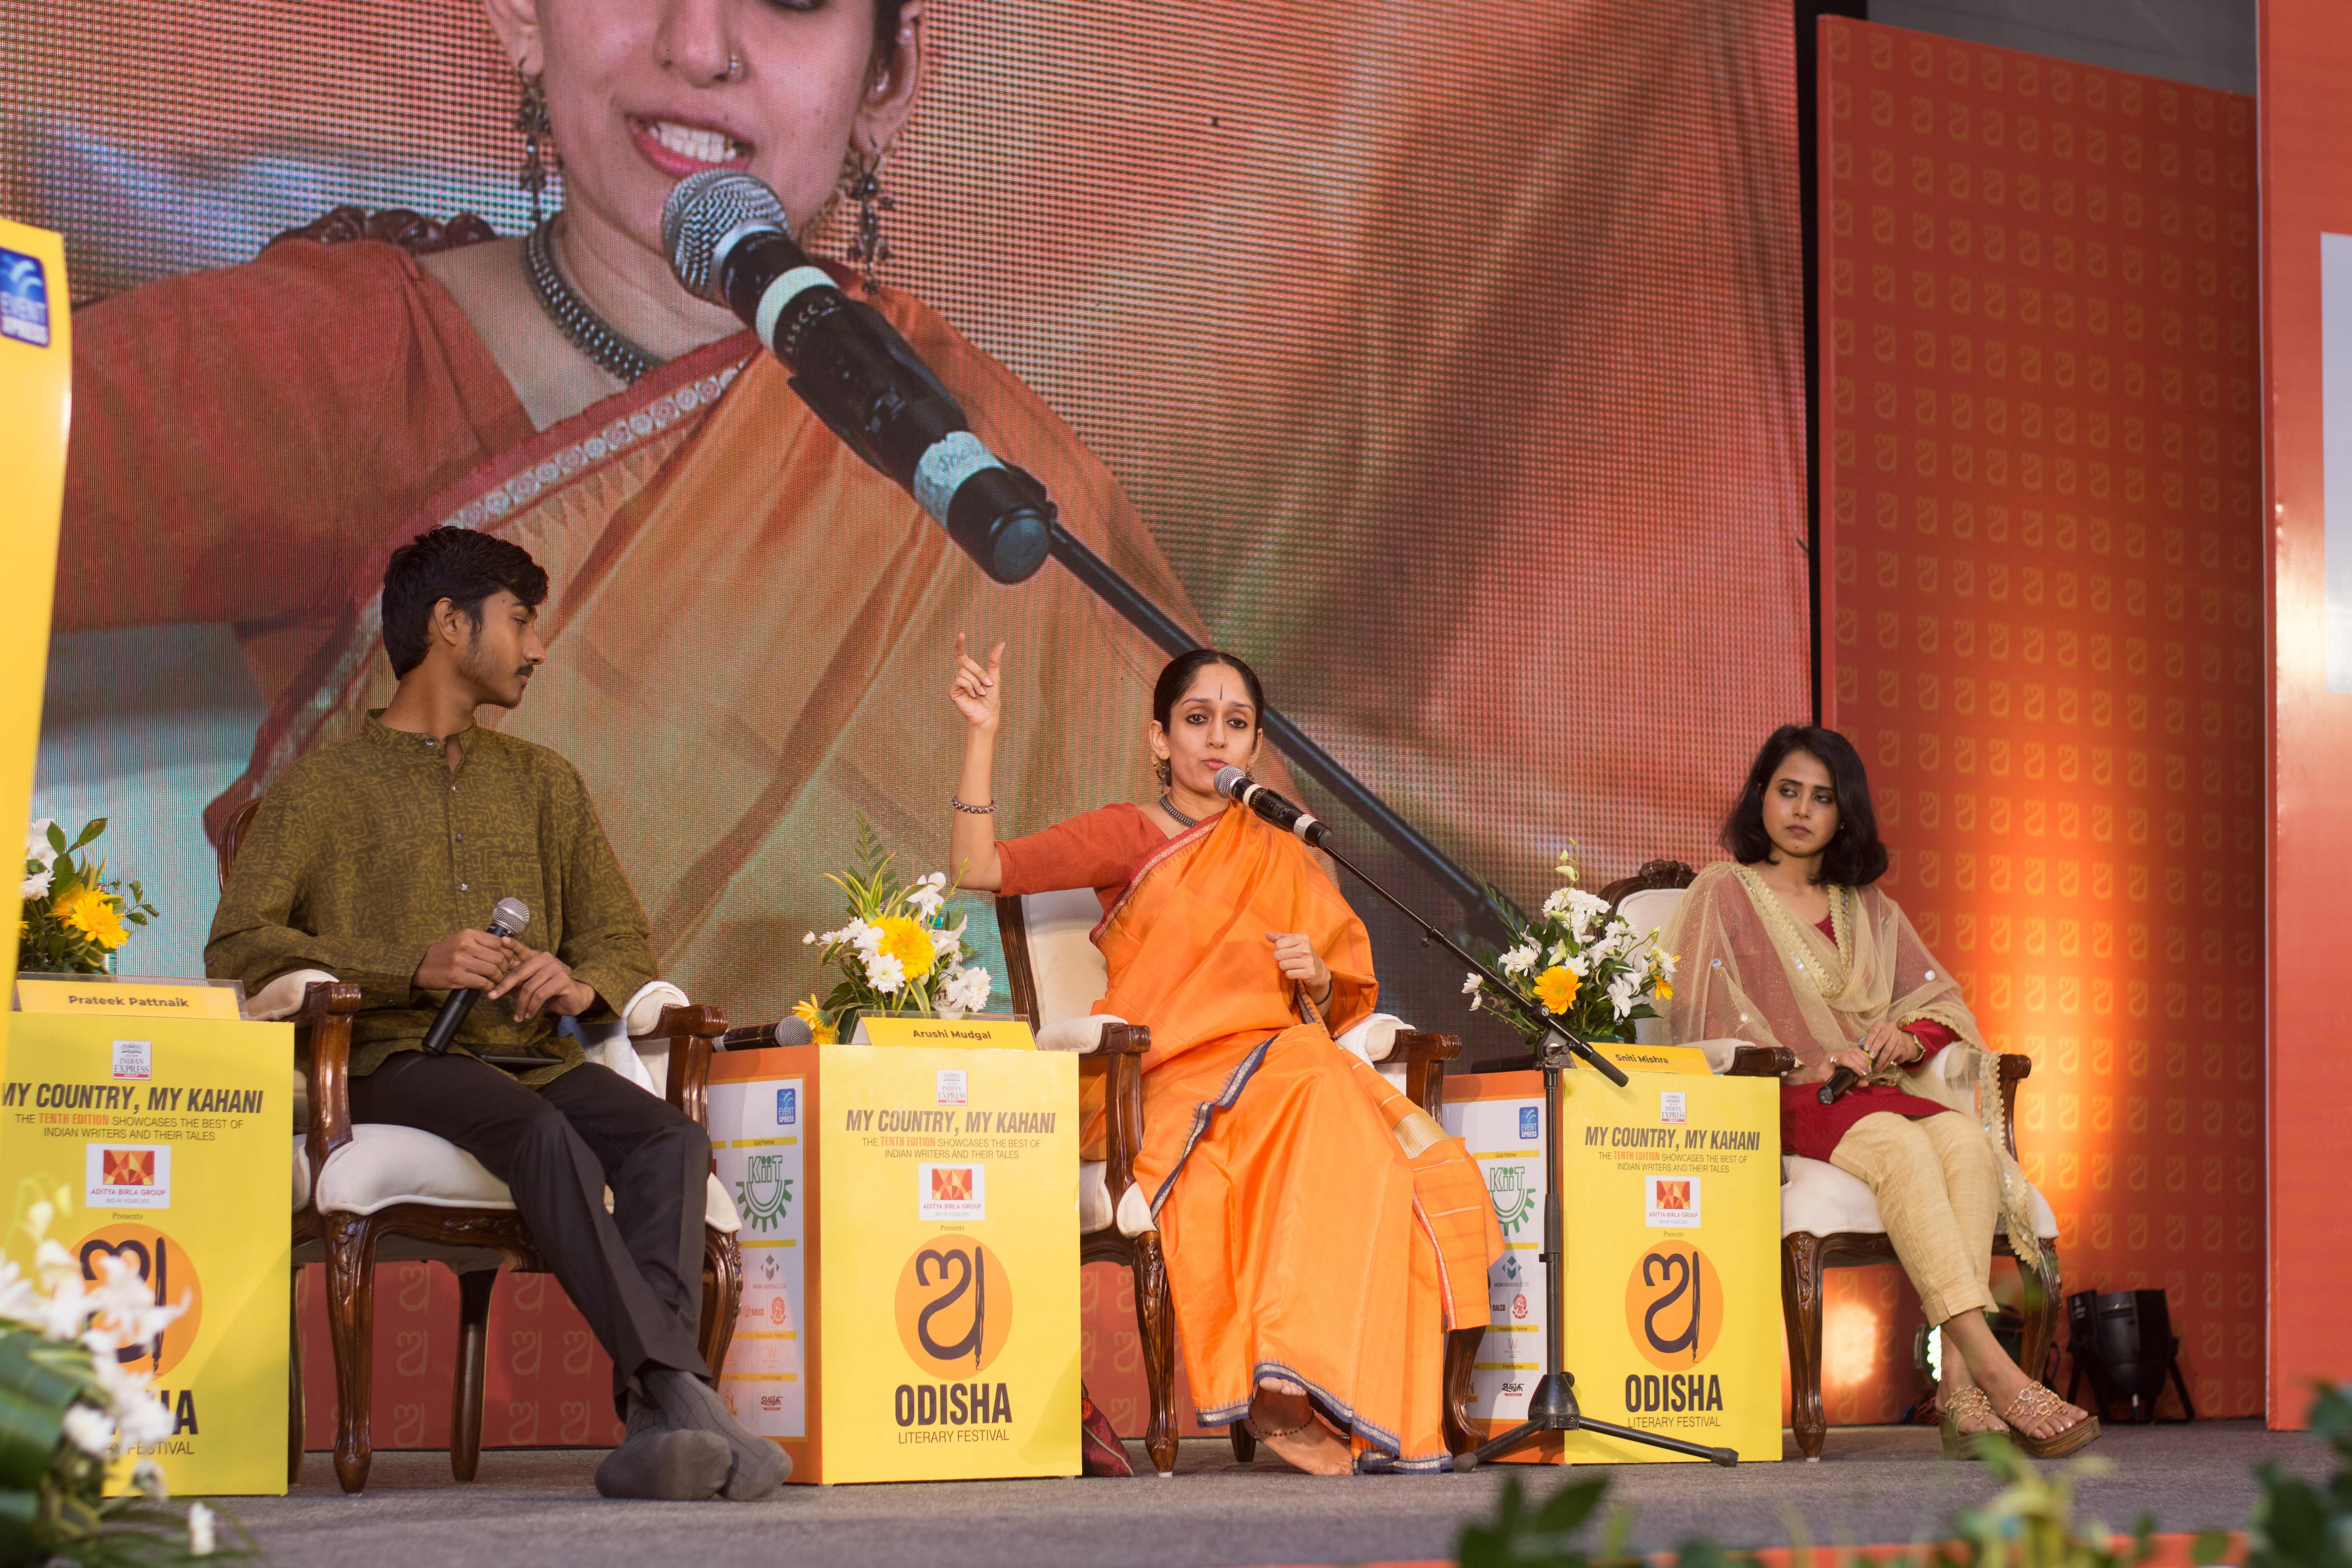 From left to right - Prateek Pattnaik, Researcher, musician and archivist, Arushi Mudgal, Odissi exponent and Sniti Mishra, Vocalist during the first session - Saving Cultural Practices: Stories of Our Future, on the first day of Odisha Literary Festival in Bhubaneswar - Express / DEBADATTA MALLICK